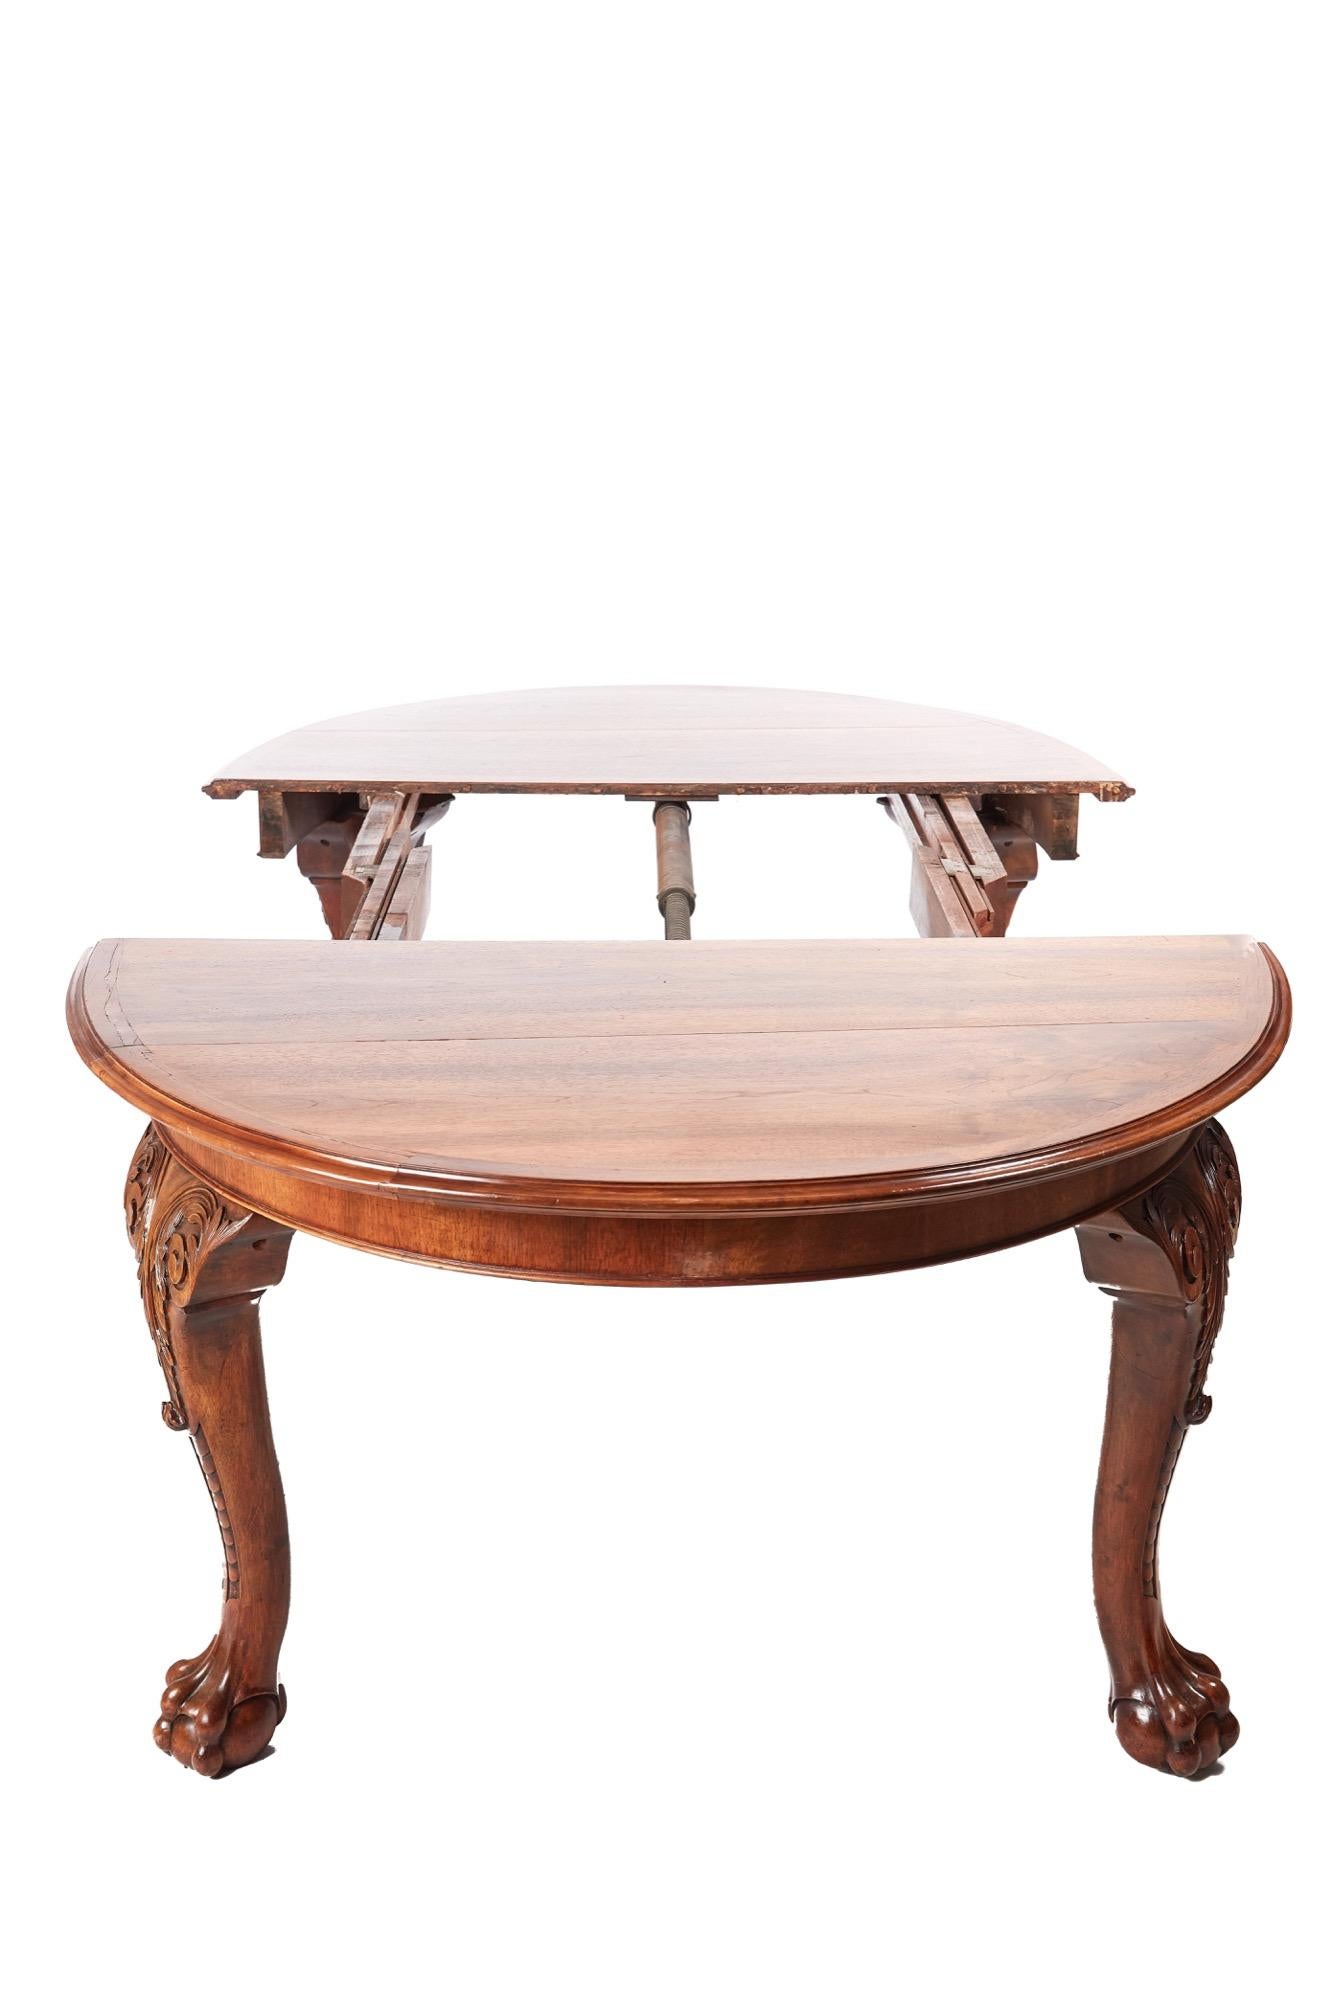 antique walnut dining table for sale